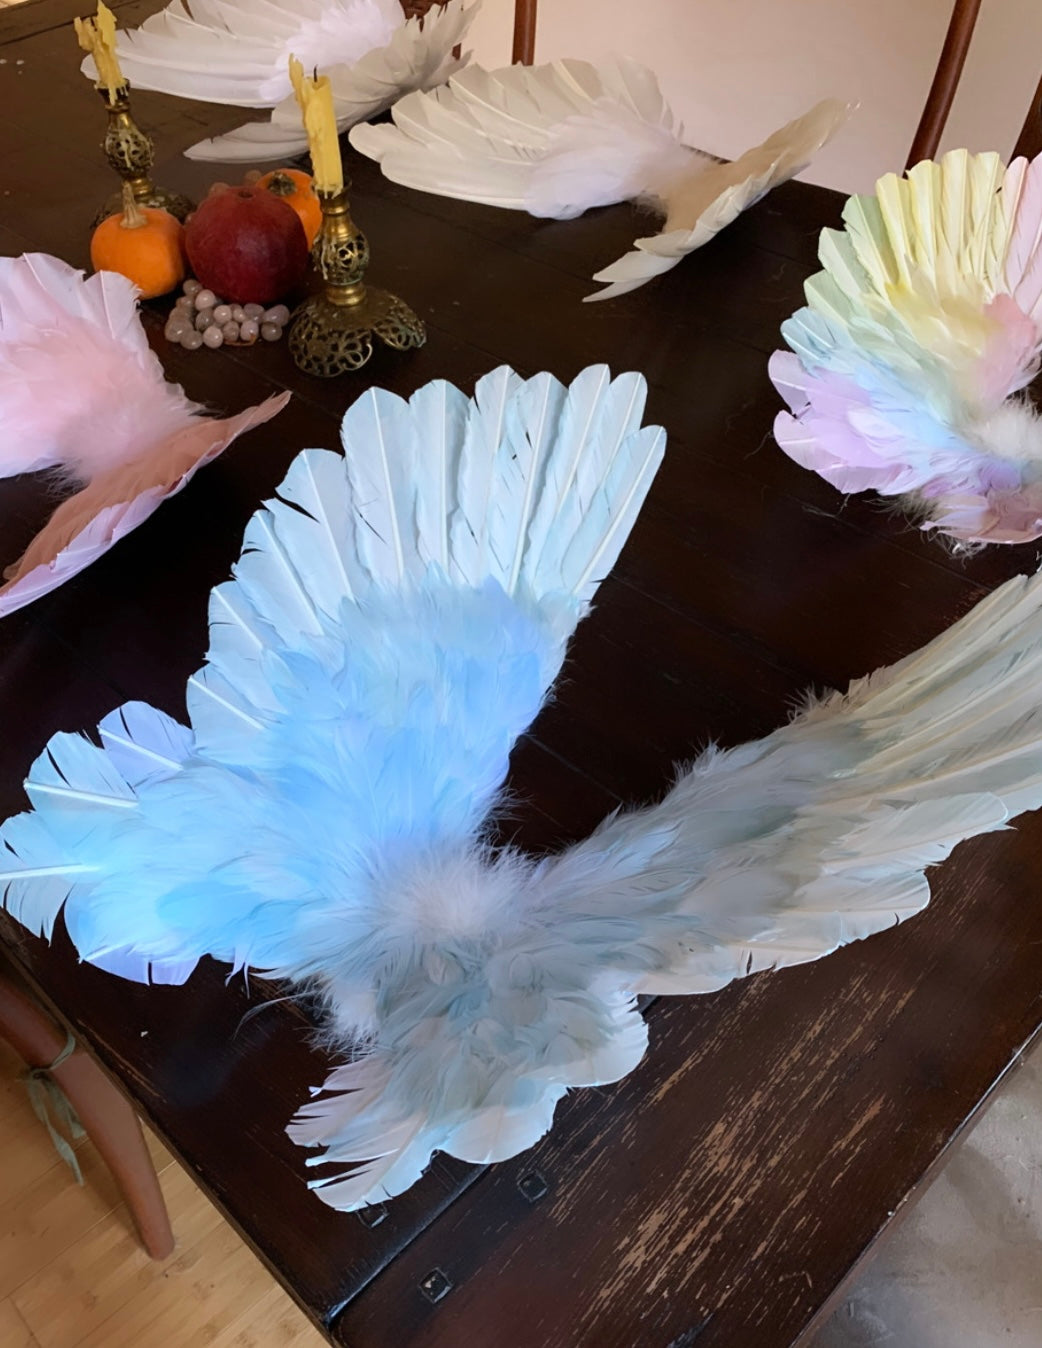 Designer Made Floating Wings in Baby Blue